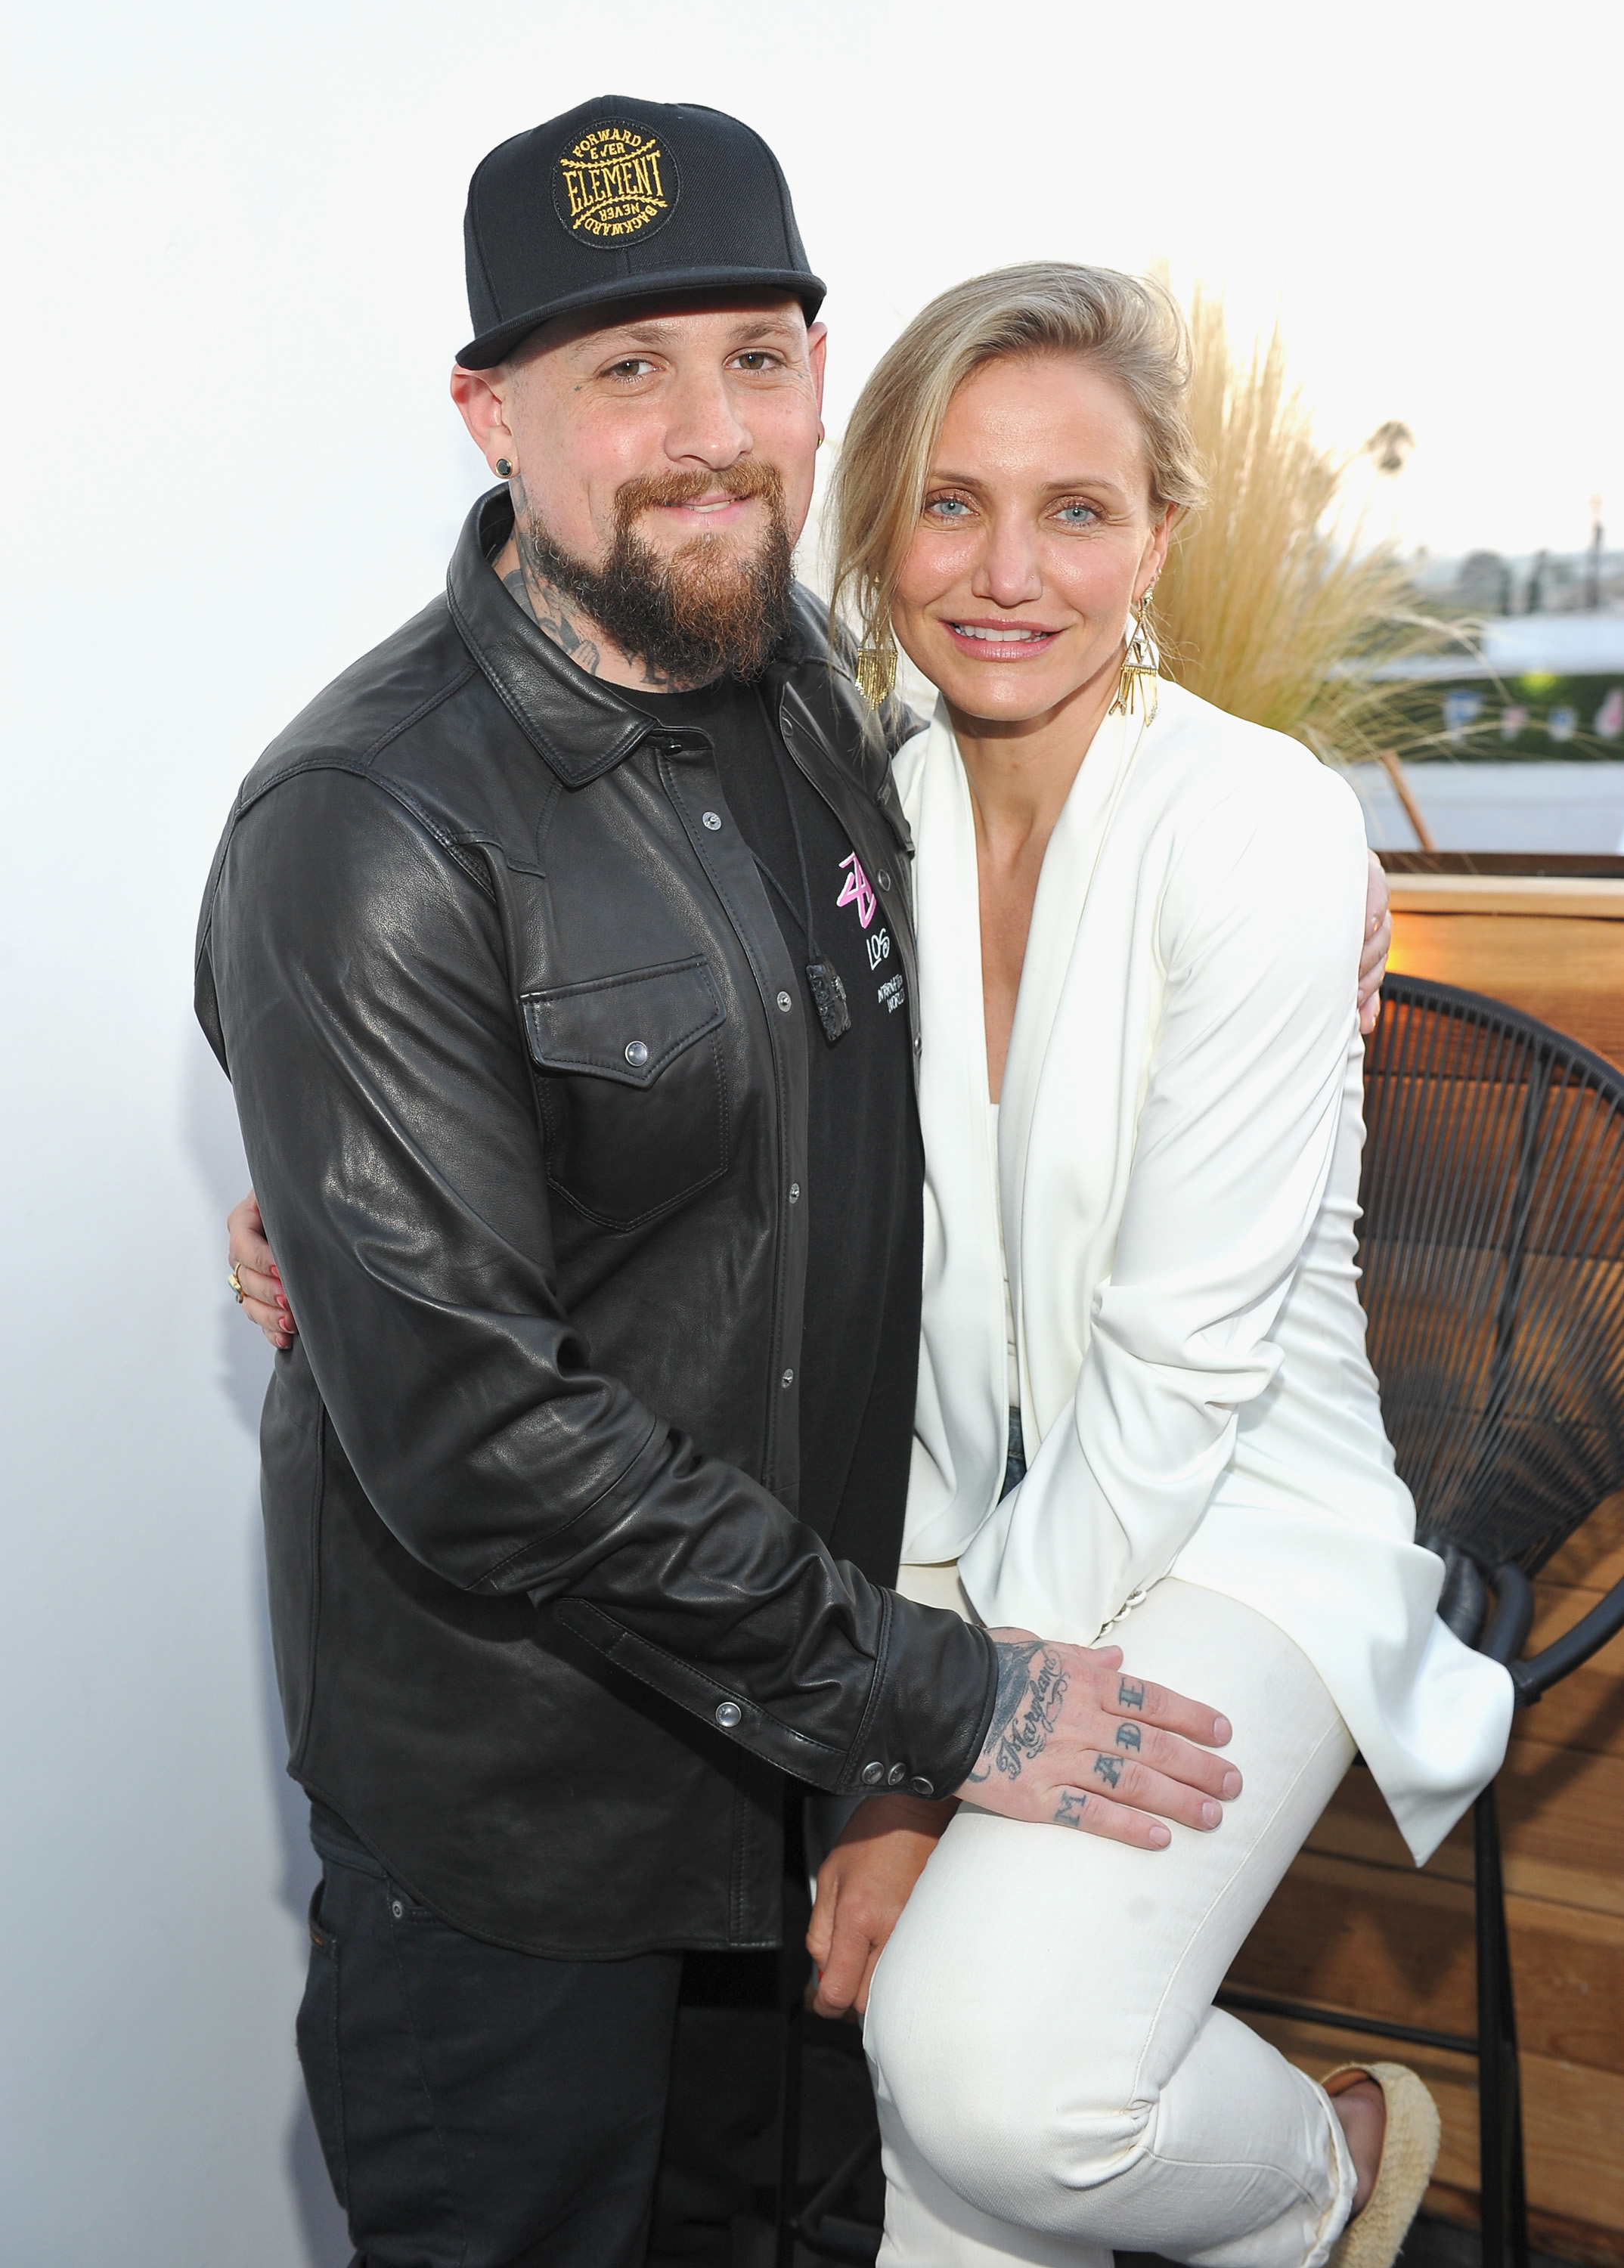 Cameron Diaz and Benj Madden have been a couple for nearly a decade and share one child together